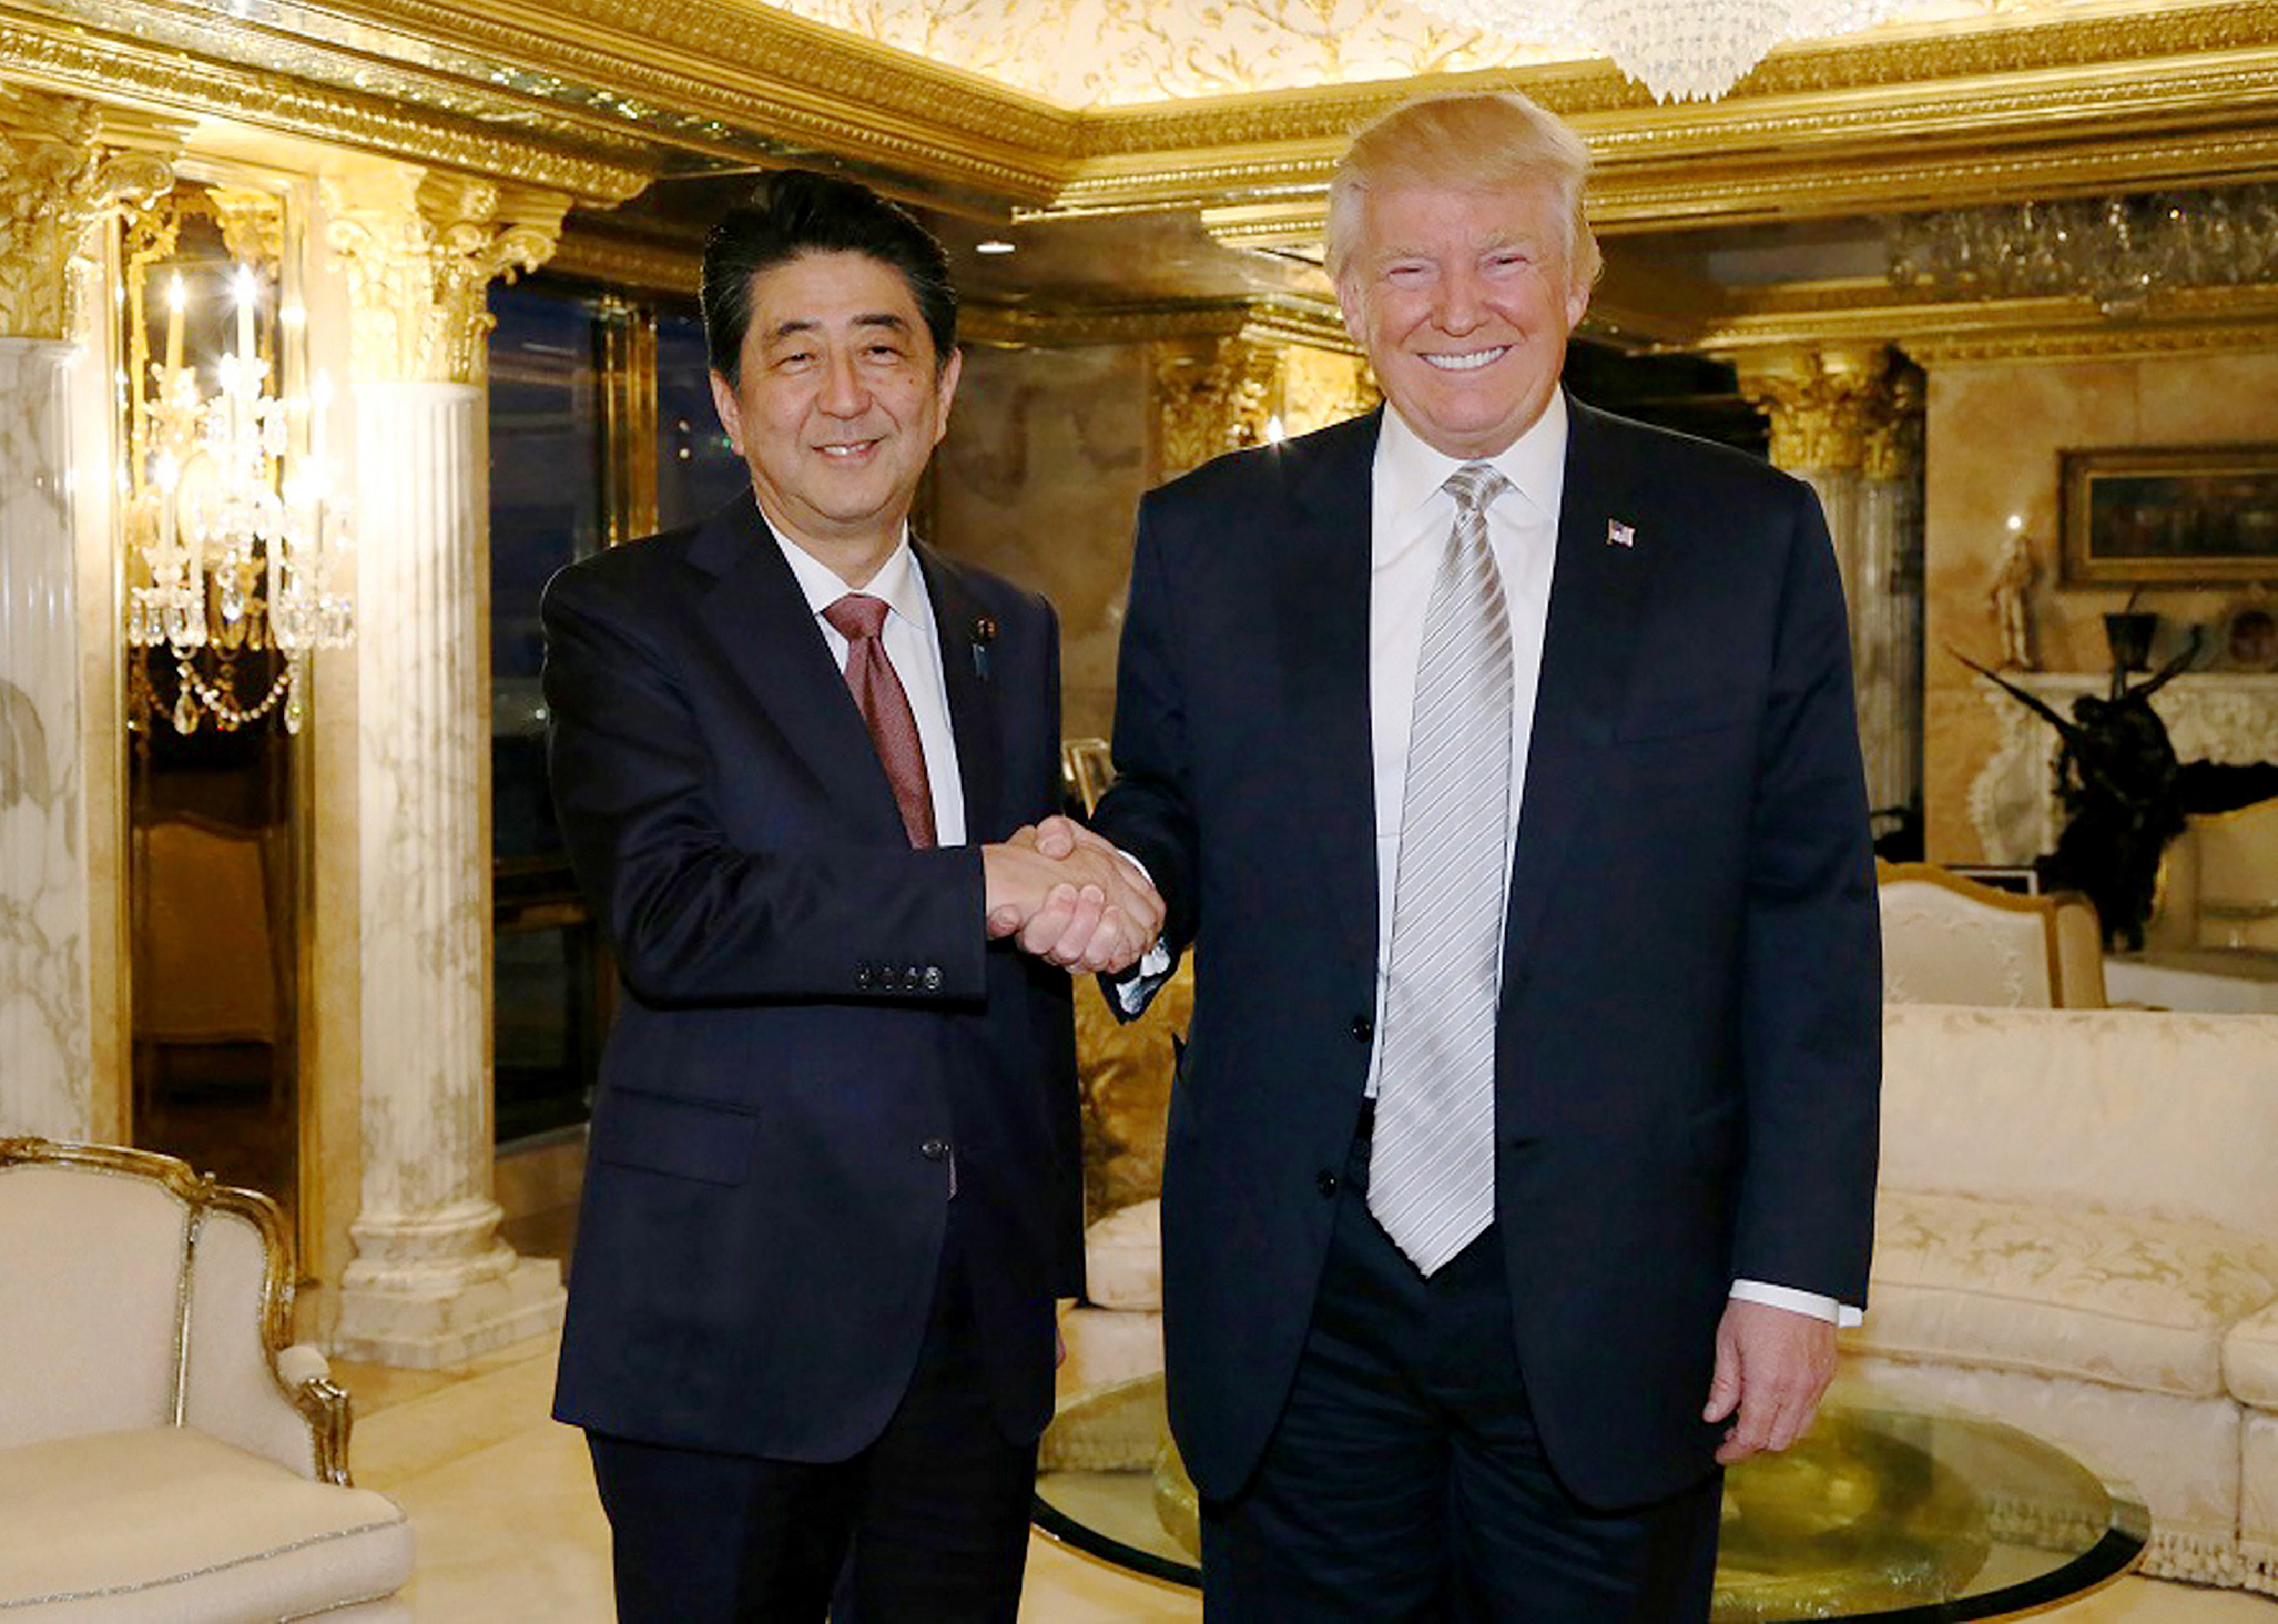 This handout picture from Japan's Cabinet Secretariat released on November 18, 2016 shows Japan's Prime Minister Shinzo Abe (L) shaking hands with US President-elect Donald Trump in New York. Abe voiced confidence on November 17 about Trump as he became the first foreign leader to meet the US president-elect, who was narrowing in on cabinet choices. / AFP PHOTO / Cabinet Secretariat / STR / HANDOUT RESTRICTED TO EDITORIAL USE - MANDATORY CREDIT "AFP PHOTO / CABINET SECRETARIAT" - NO MARKETING - NO ADVERTISING CAMPAIGNS - DISTRIBUTED AS A SERVICE TO CLIENTS